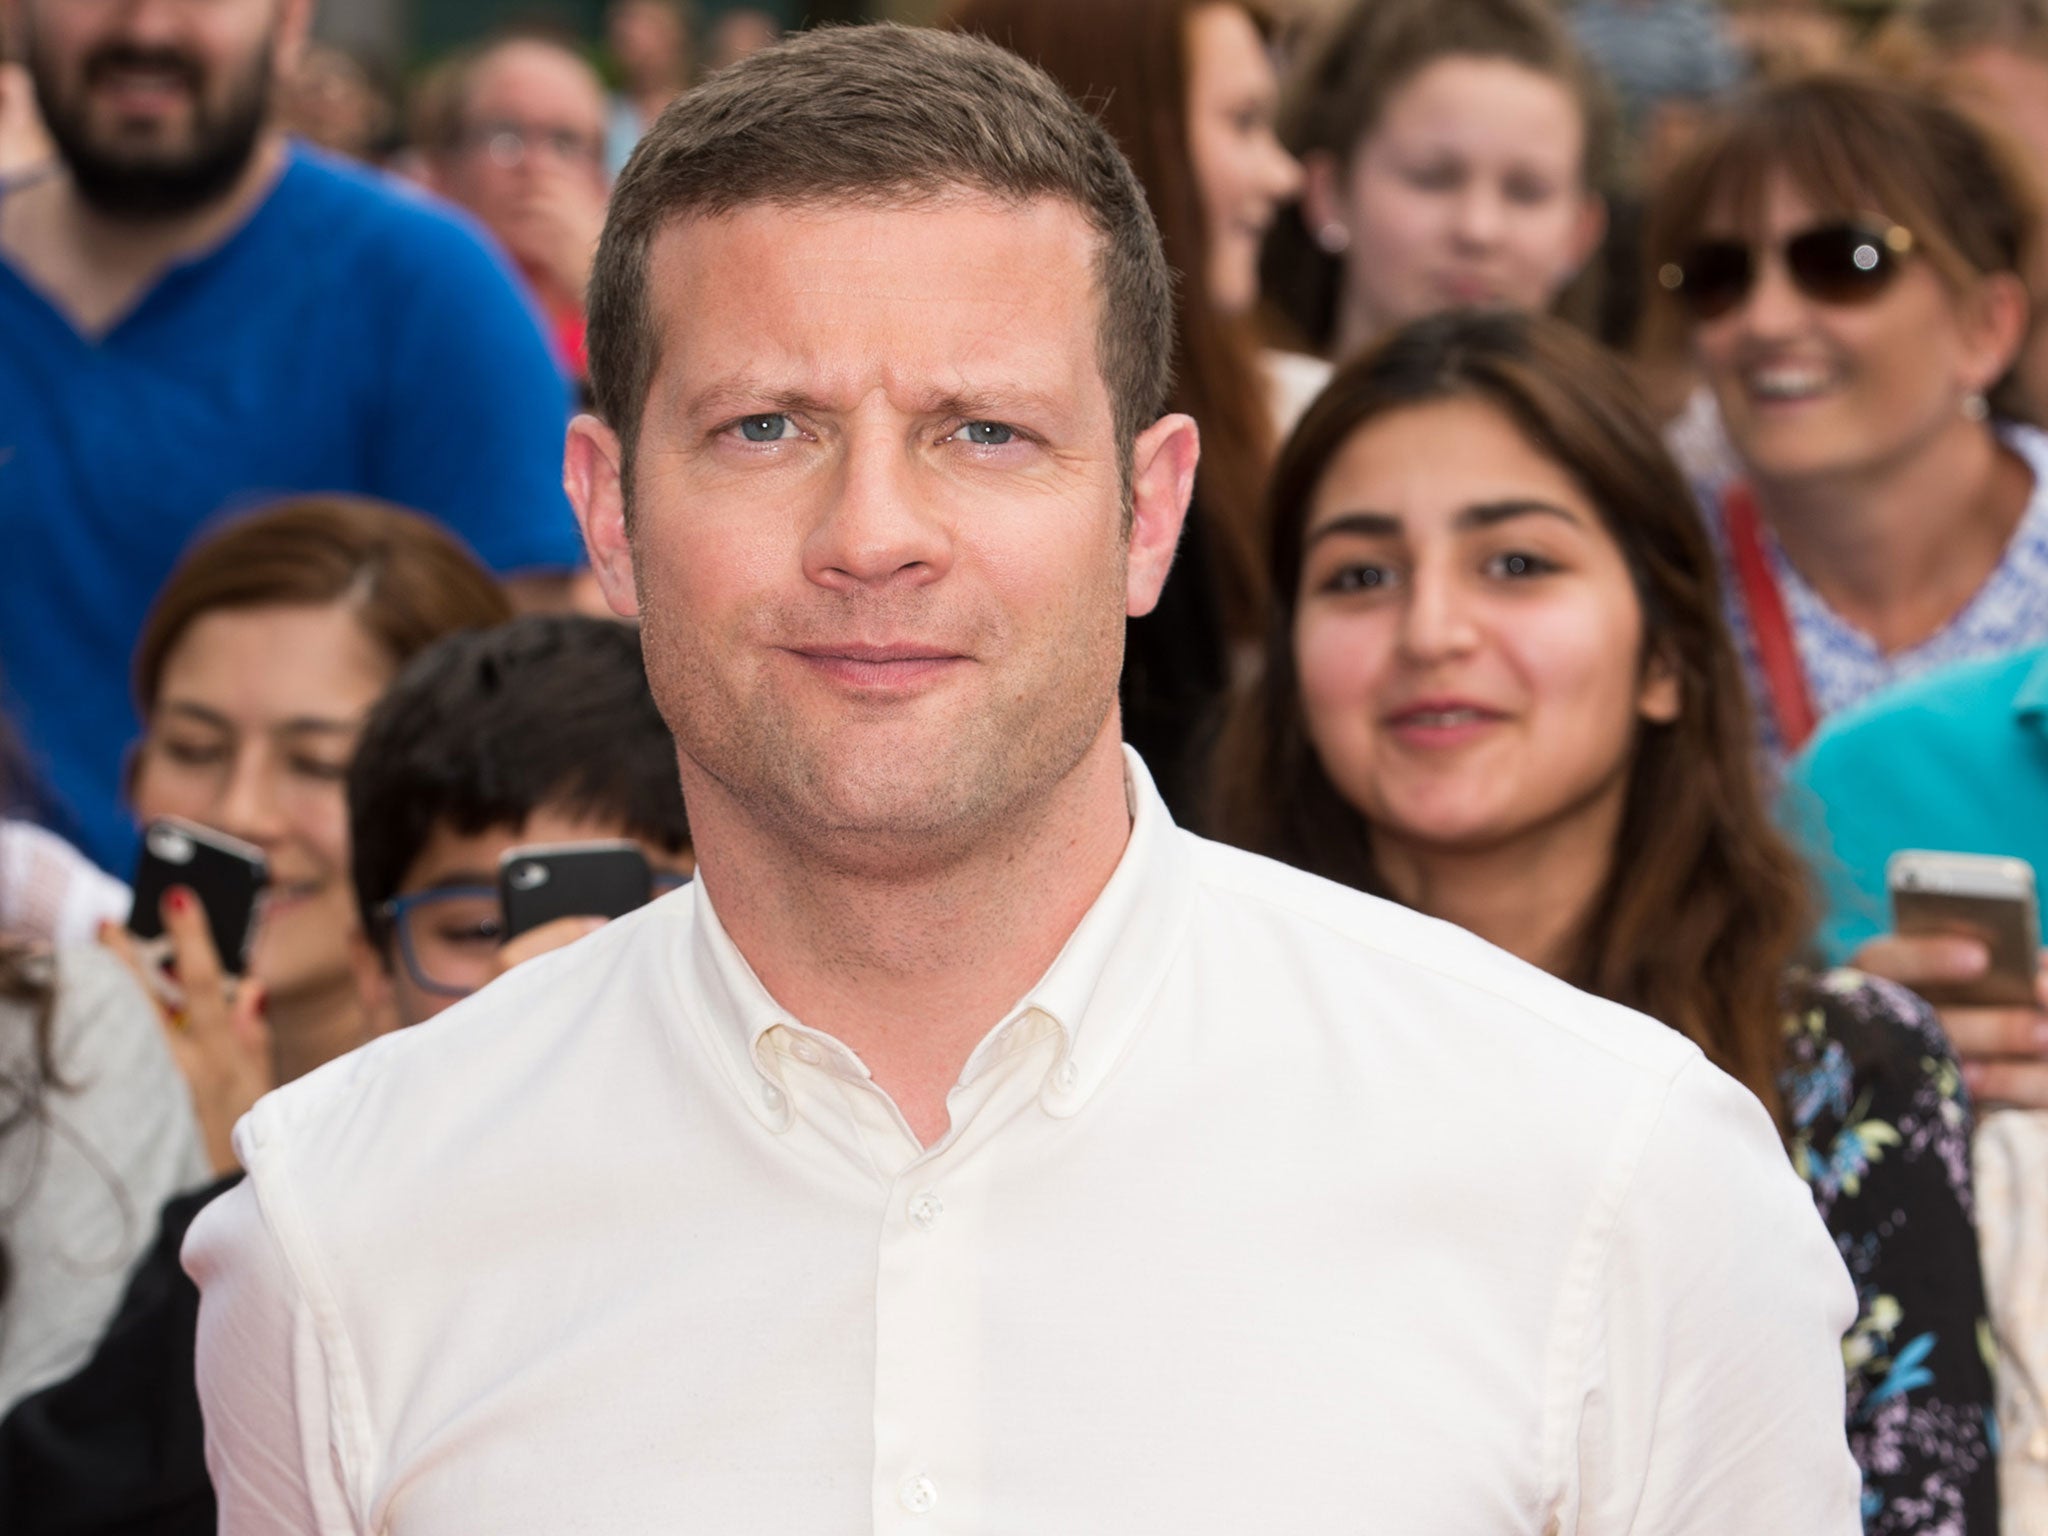 Dermot O'Leary attends the X Factor Wembley Arena auditions at Wembley on August 1, 2014 in London, England.